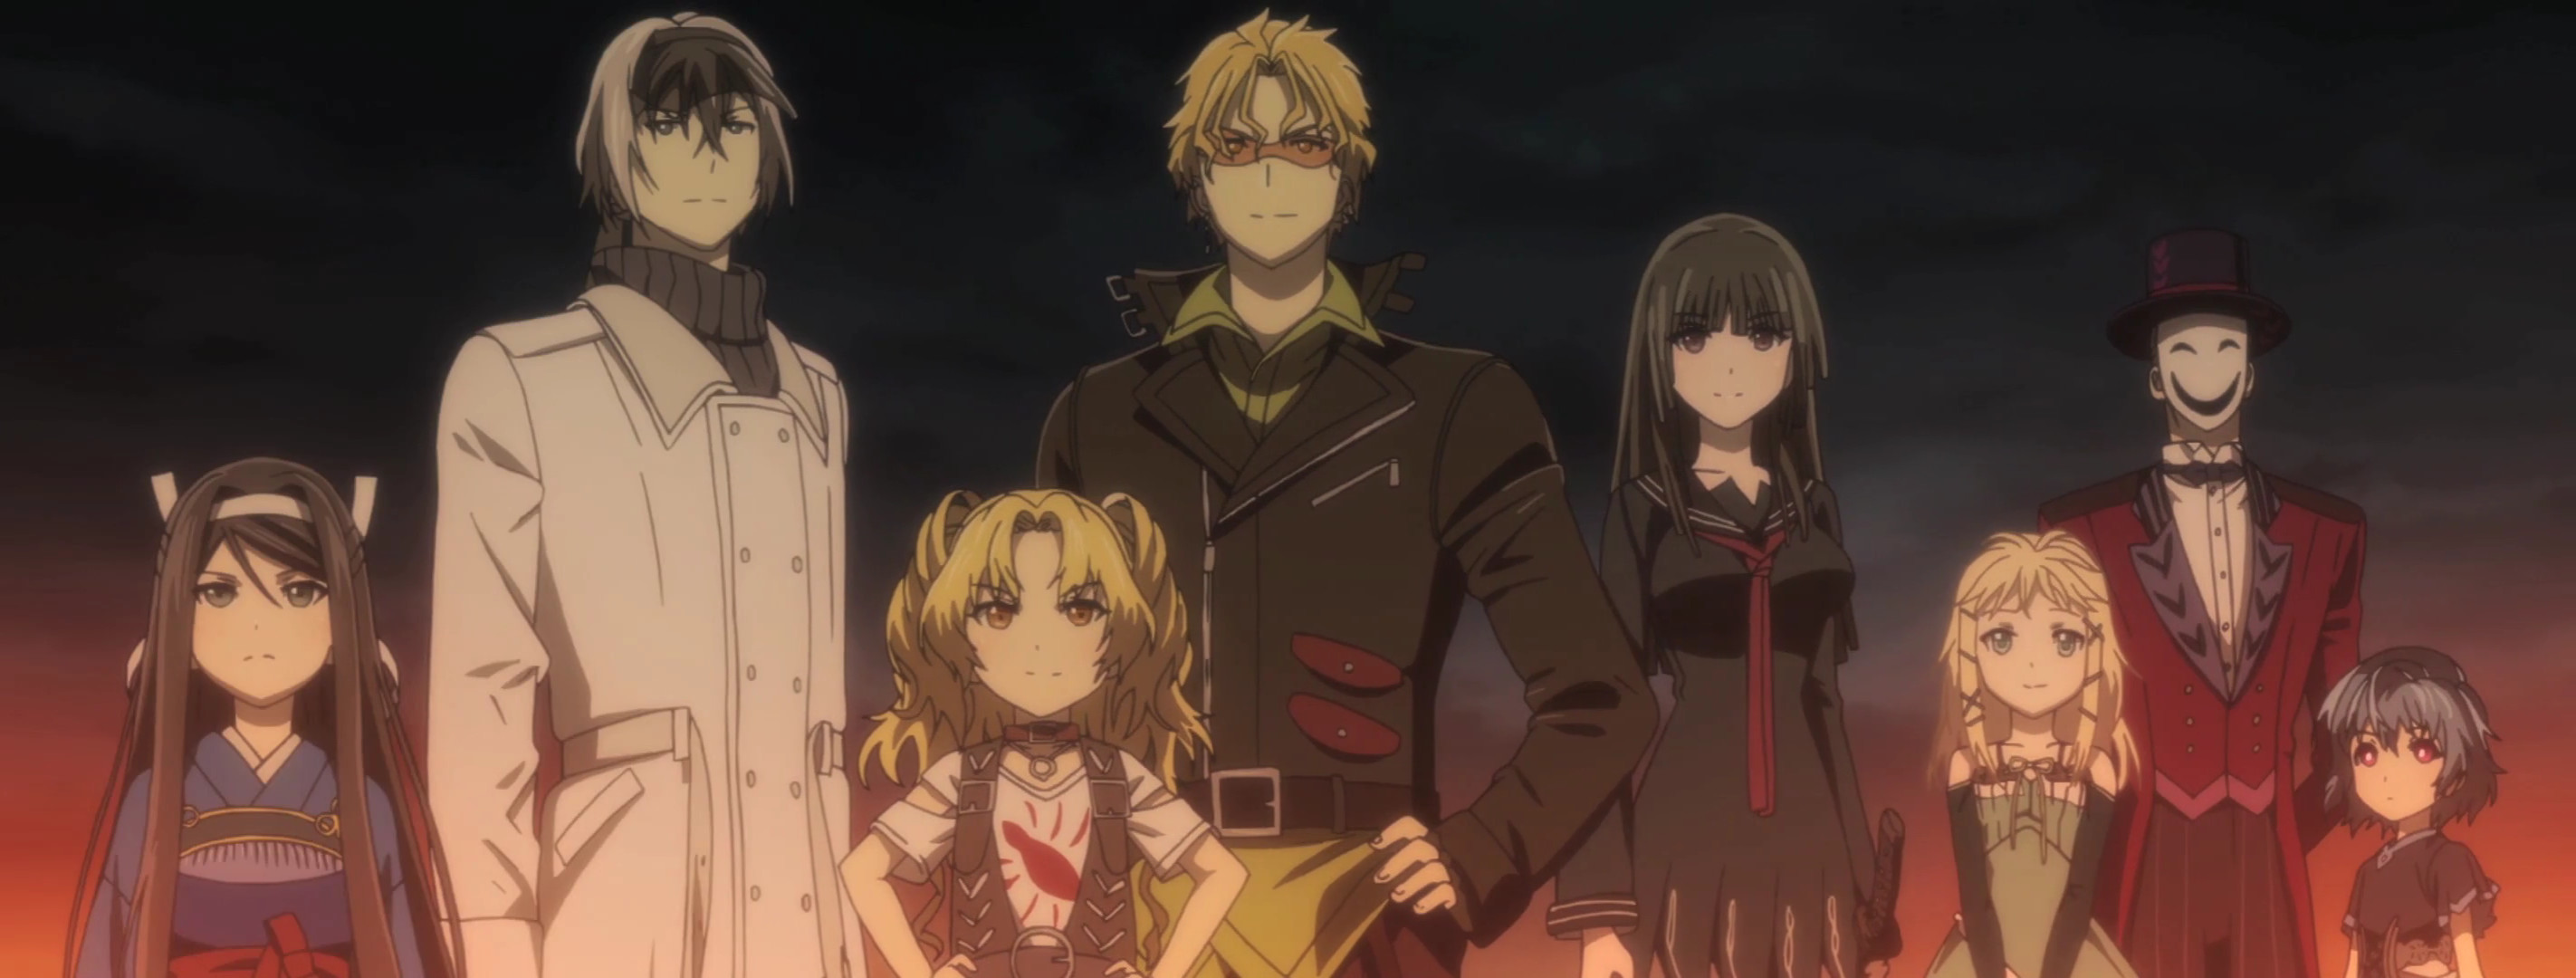 2845x1080 [Spoilers] Black Bullet Episode 12 Discussion : anime